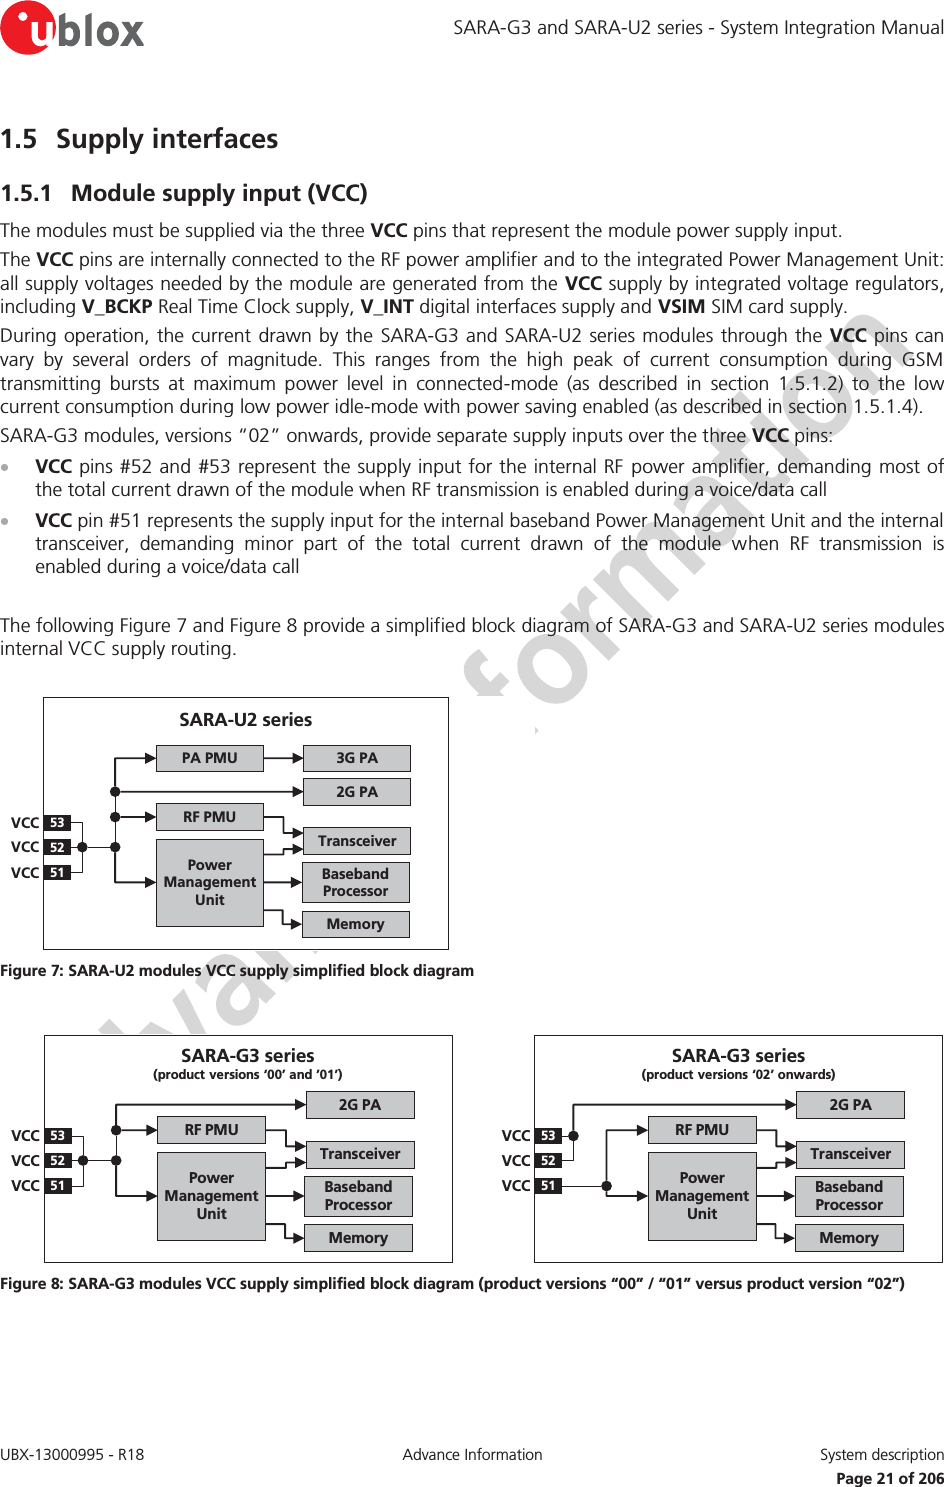 SARA-G3 and SARA-U2 series - System Integration Manual UBX-13000995 - R18  Advance Information  System description   Page 21 of 206 1.5 Supply interfaces 1.5.1 Module supply input (VCC) The modules must be supplied via the three VCC pins that represent the module power supply input. The VCC pins are internally connected to the RF power amplifier and to the integrated Power Management Unit: all supply voltages needed by the module are generated from the VCC supply by integrated voltage regulators, including V_BCKP Real Time Clock supply, V_INT digital interfaces supply and VSIM SIM card supply. During operation, the current drawn by the SARA-G3 and SARA-U2 series modules through the VCC pins can vary by several orders of magnitude. This ranges from the high peak of current consumption during GSM transmitting bursts at maximum power level in connected-mode (as described in section 1.5.1.2) to the low current consumption during low power idle-mode with power saving enabled (as described in section 1.5.1.4). SARA-G3 modules, versions “02” onwards, provide separate supply inputs over the three VCC pins: x VCC pins #52 and #53 represent the supply input for the internal RF power amplifier, demanding most of the total current drawn of the module when RF transmission is enabled during a voice/data call x VCC pin #51 represents the supply input for the internal baseband Power Management Unit and the internal transceiver, demanding minor part of the total current drawn of the module when RF transmission is enabled during a voice/data call  The following Figure 7 and Figure 8 provide a simplified block diagram of SARA-G3 and SARA-U2 series modules internal VCC supply routing.  53VCC52VCC51VCCSARA-U2 seriesPower ManagementUnitMemoryBaseband ProcessorTransceiverRF PMUPA PMU 3G PA2G PA Figure 7: SARA-U2 modules VCC supply simplified block diagram   53VCC52VCC51VCCSARA-G3 series(product versions ‘00’ and ’01’)Power ManagementUnitMemoryBaseband ProcessorTransceiverRF PMU2G PA53VCC52VCC51VCCSARA-G3 series(product versions ‘02’ onwards)Power ManagementUnitMemoryBaseband ProcessorTransceiverRF PMU2G PA Figure 8: SARA-G3 modules VCC supply simplified block diagram (product versions “00” / “01” versus product version “02”)  